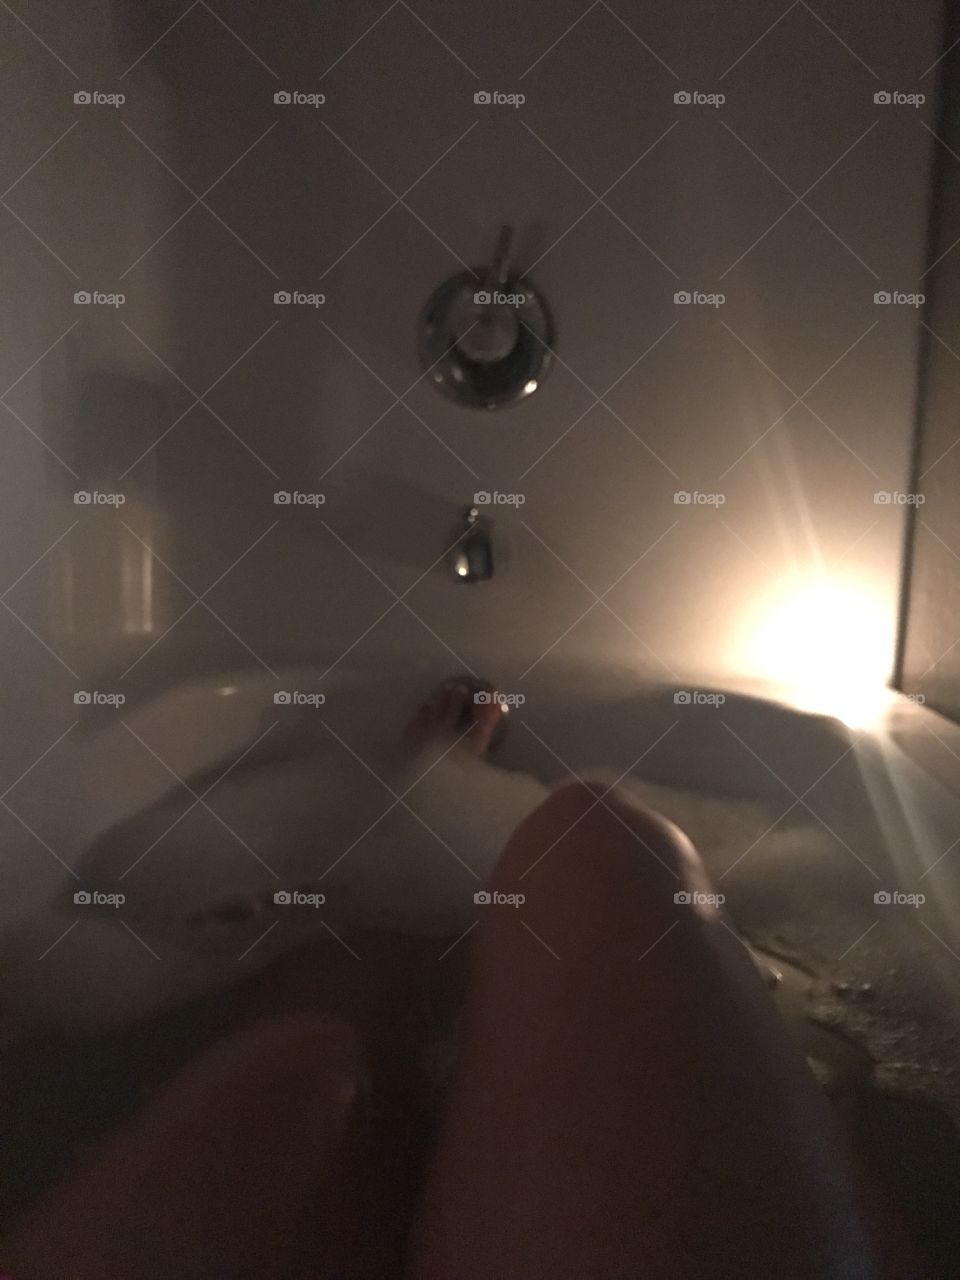 Bubble bath with candles